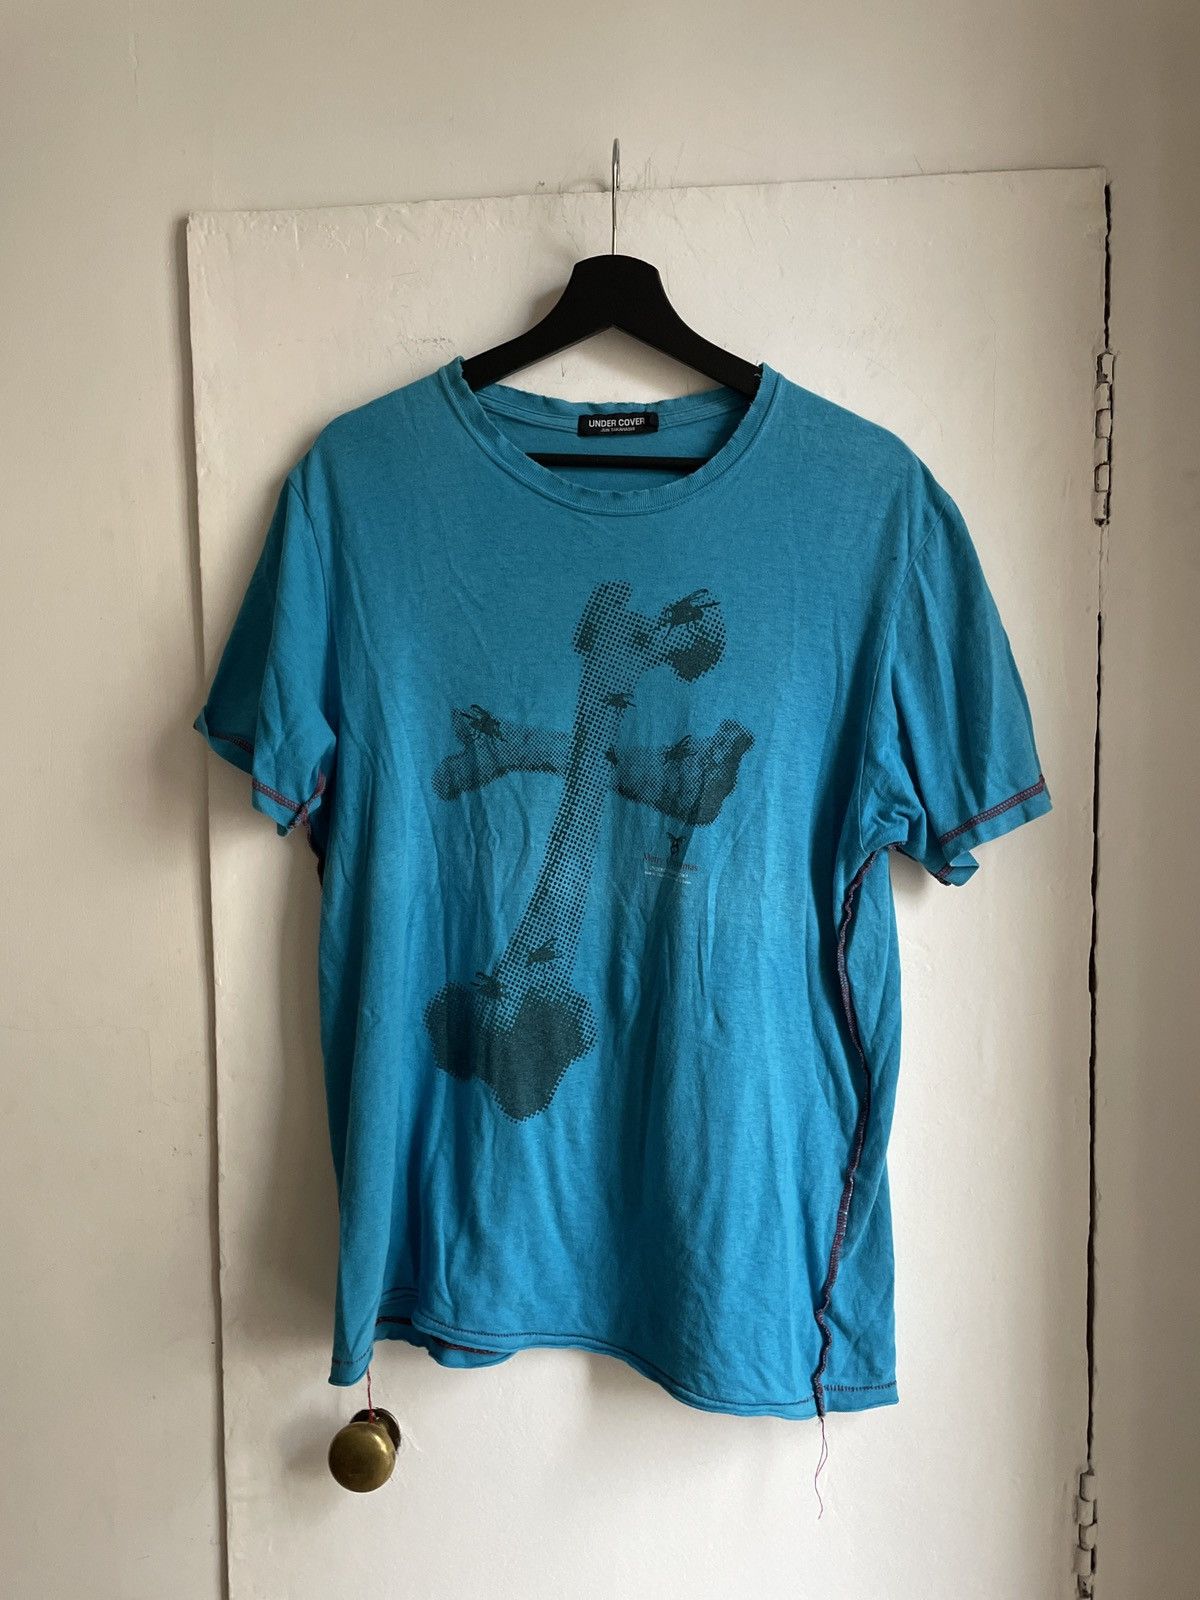 Undercover 2003 Scab Cross Bone Blue Special T Shirt | Grailed